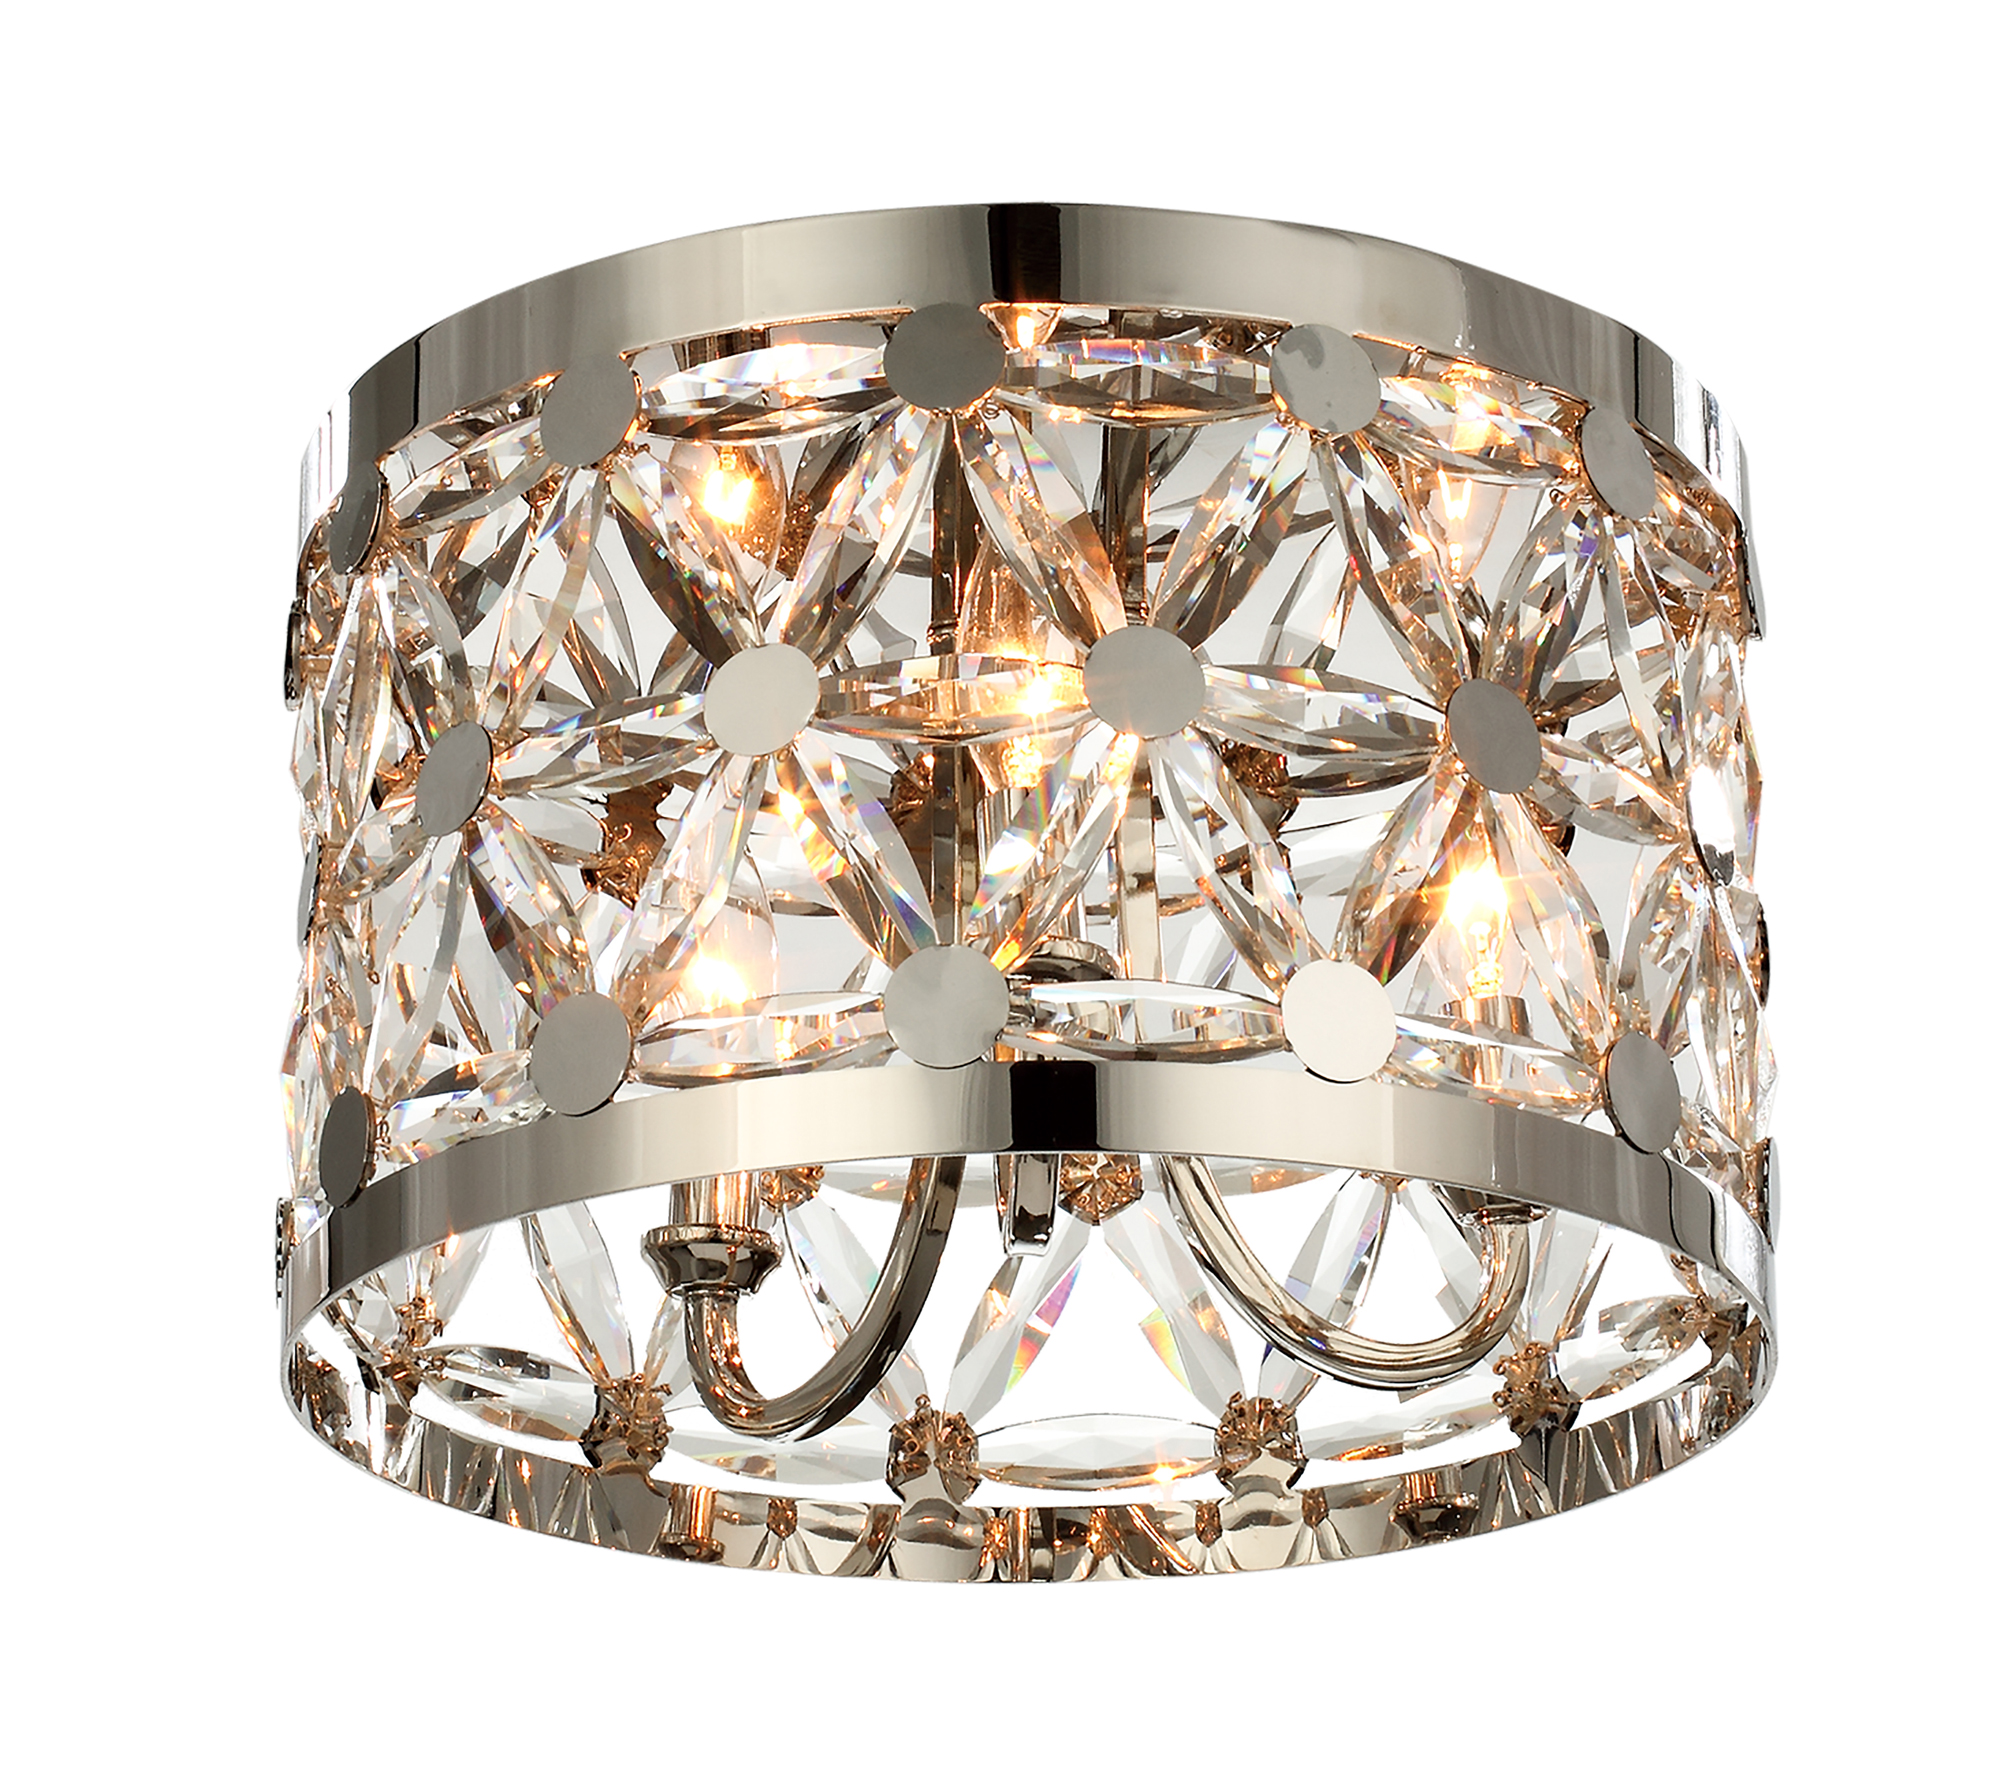 Cassiopeia Ceiling Light Fixture By Maxim Lighting 39500bcpn